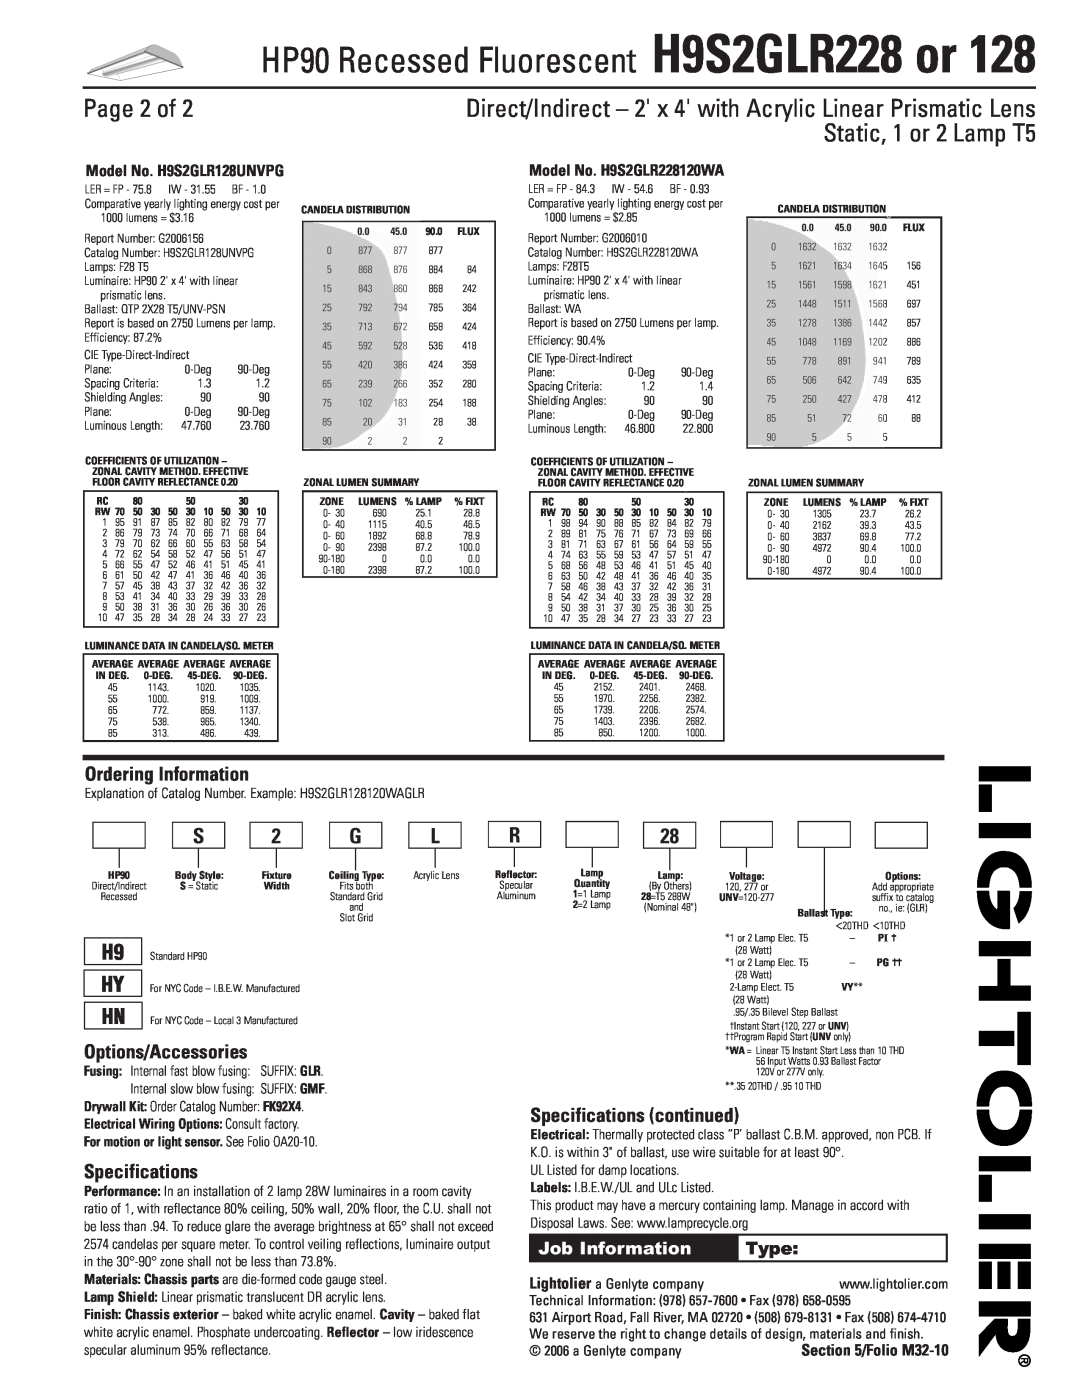 Lightolier H9S2GLR128 Page 2 of, Ordering Information, Options/Accessories, Specifications continued, Job Information 